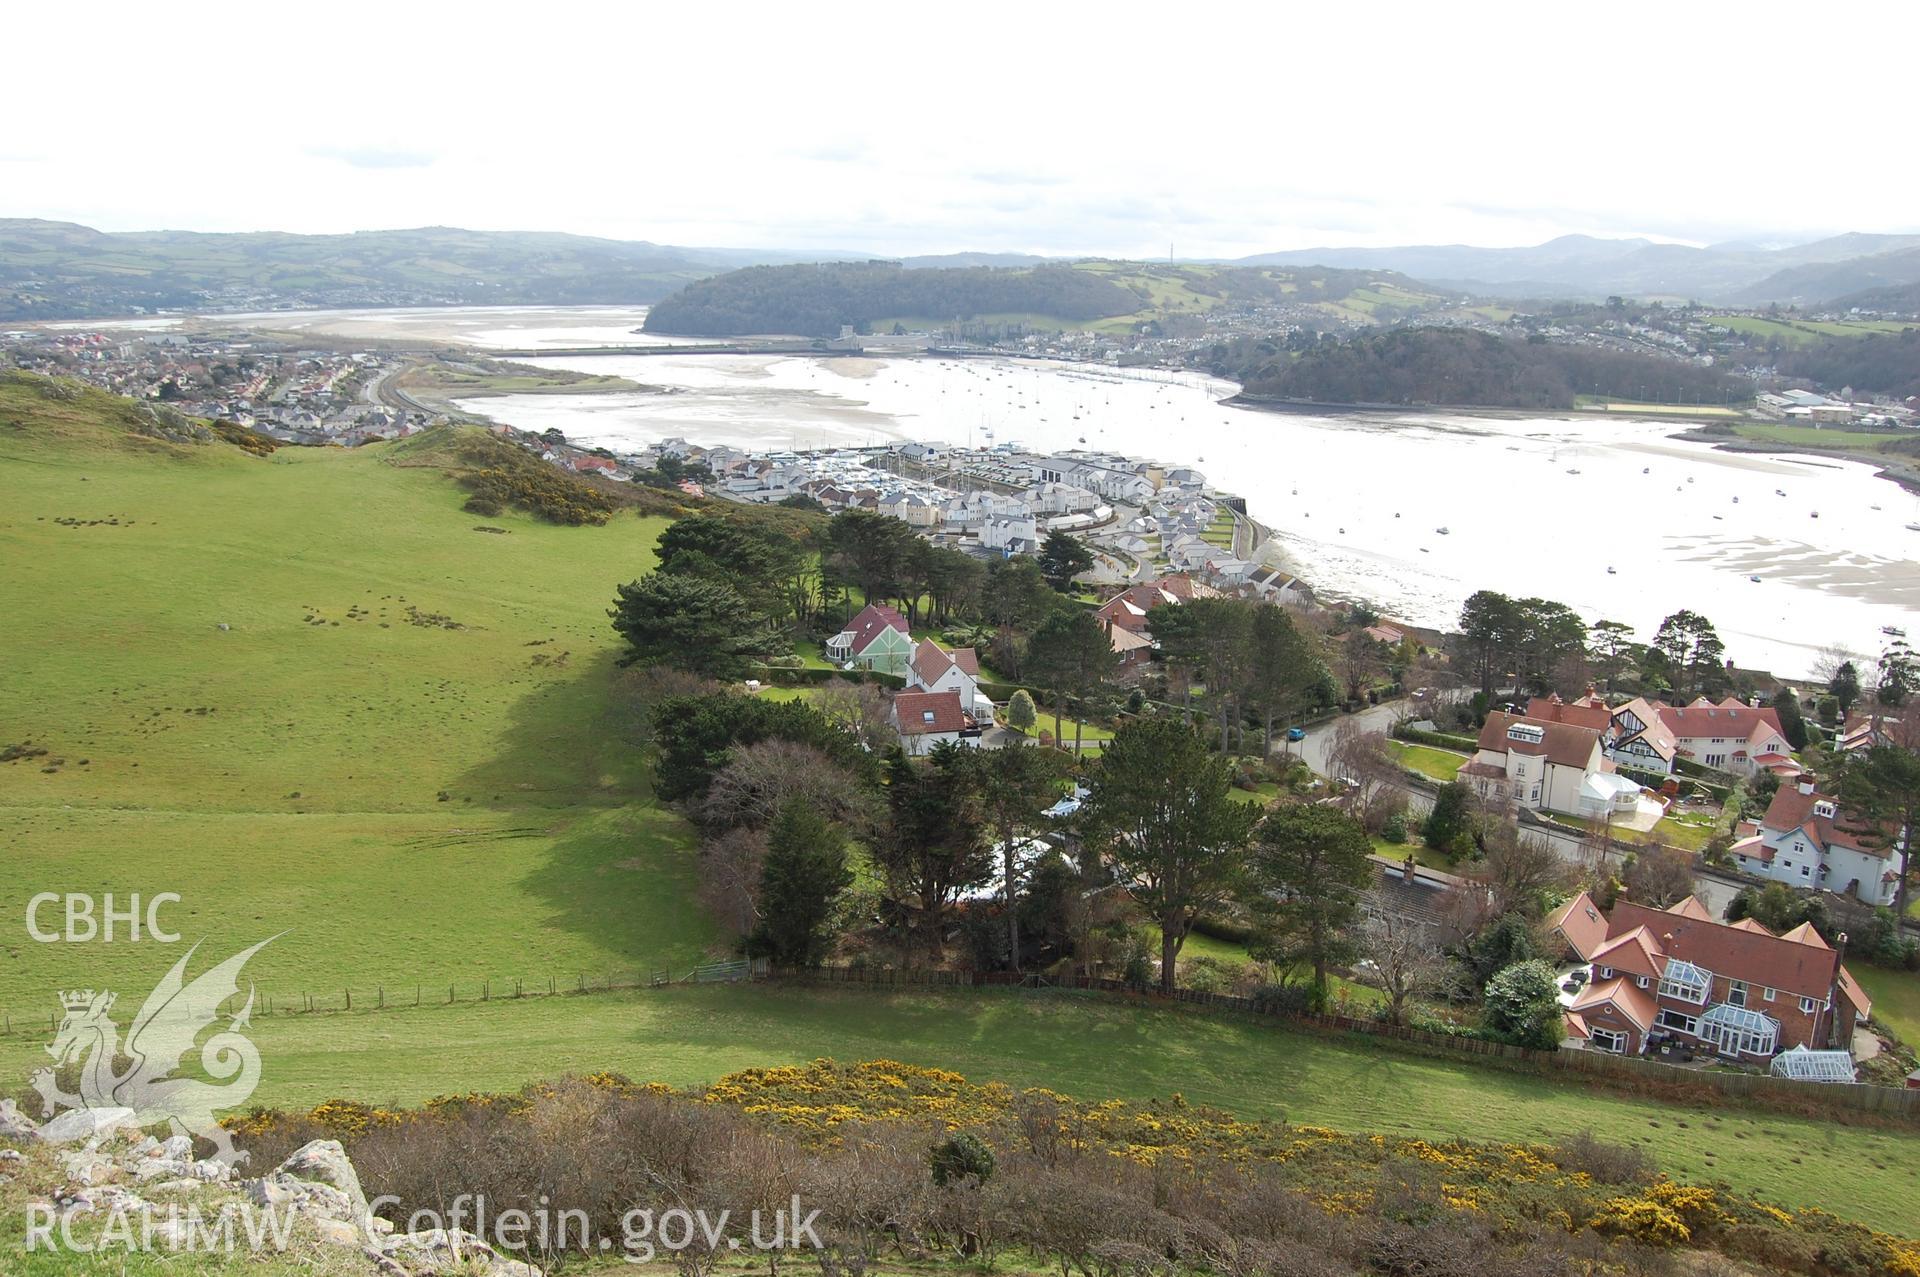 Digital photograph from an archaeological assessment of Deganwy Castle, carried out by Gwynedd Archaeological Trust, 2009. View to Conwy Castle from near upper gate to donjon.